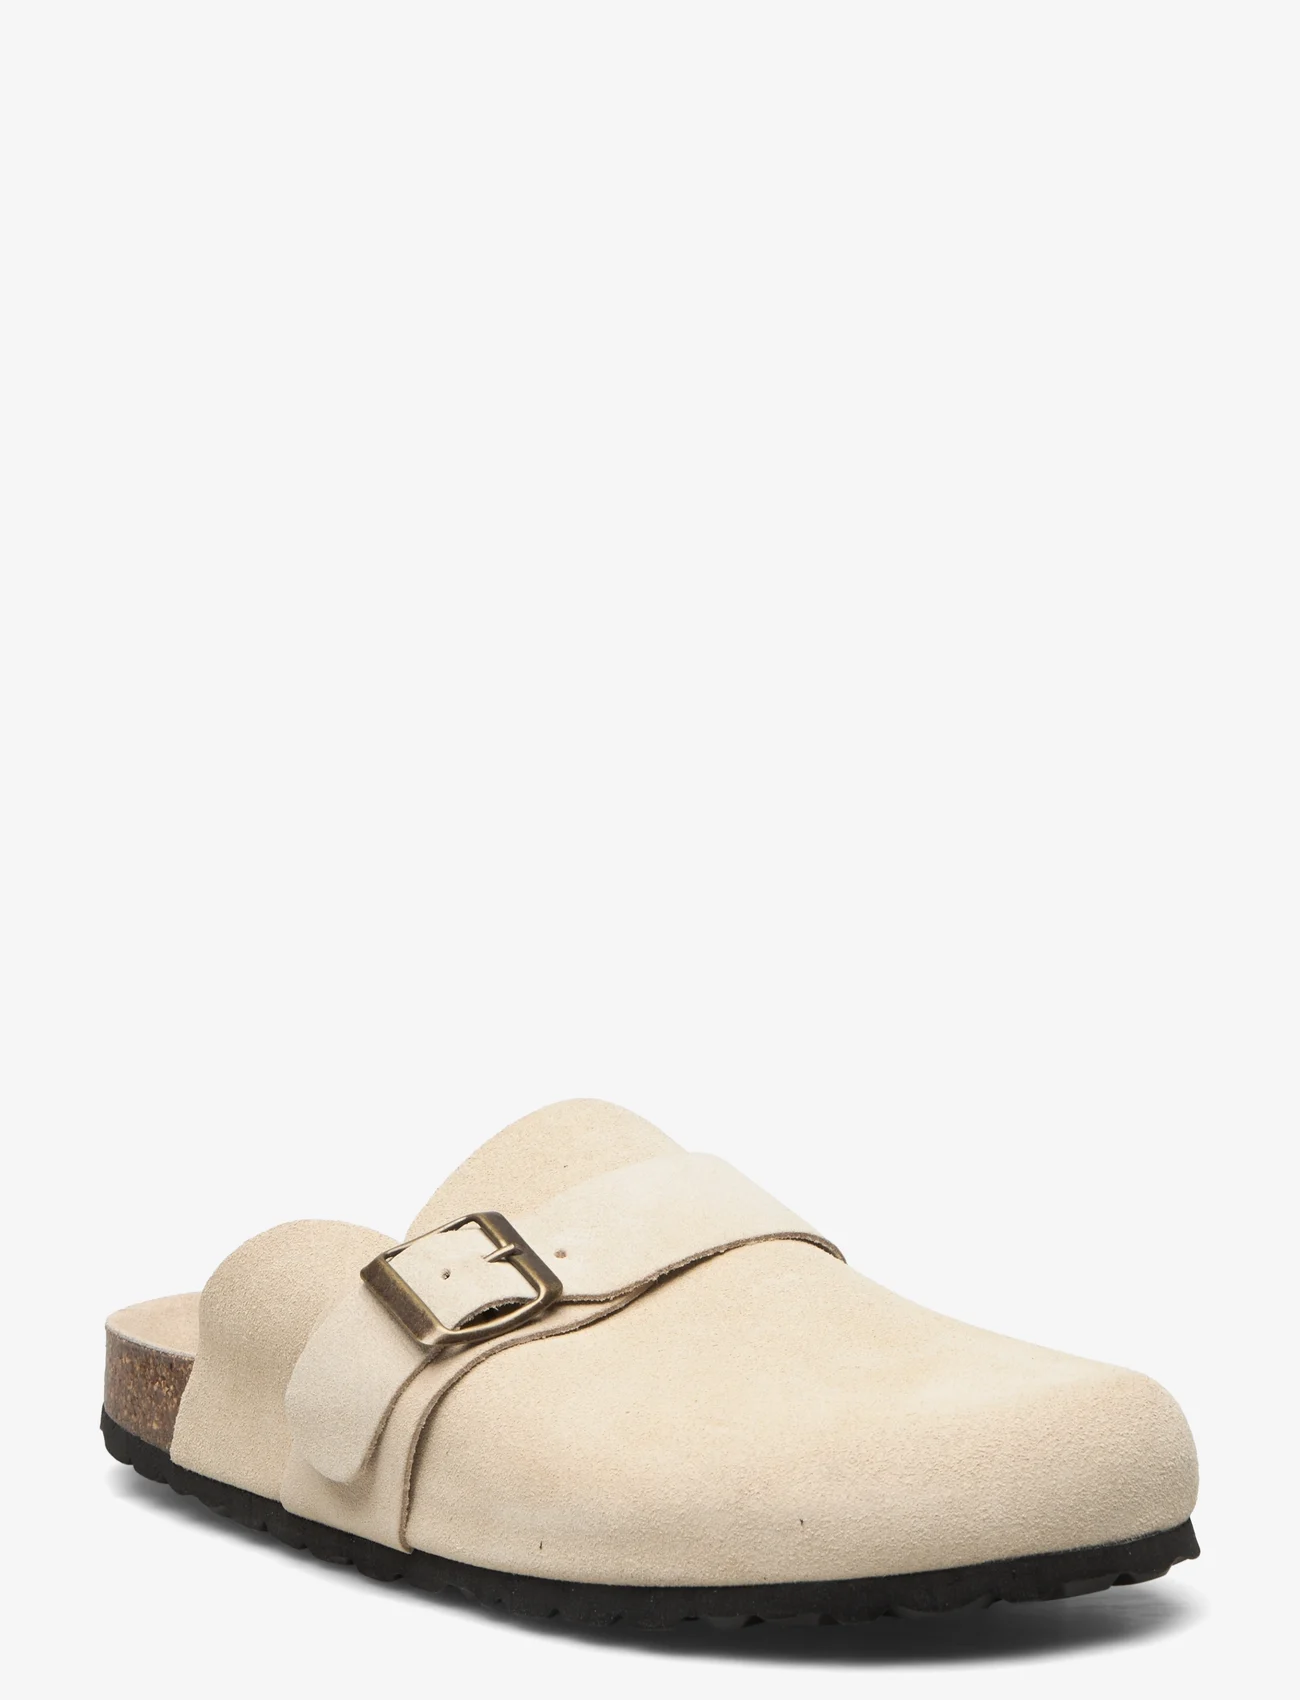 Bianco - BIAOTTO Mule Suede - sand - 0